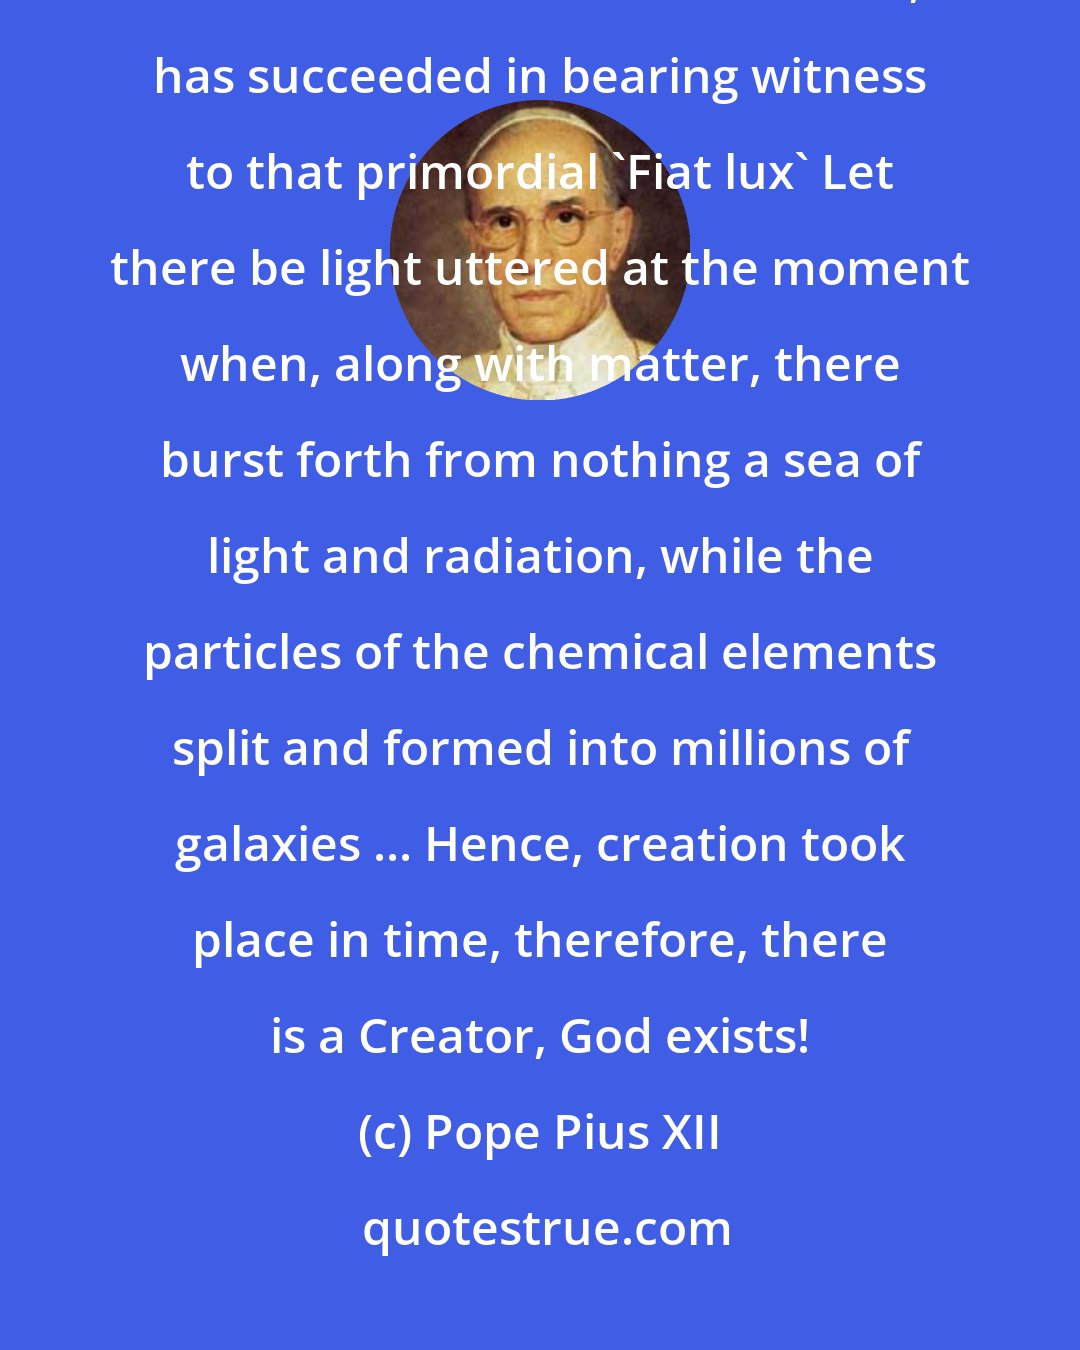 Pope Pius XII: In fact, it seems that present-day science, with one sweeping step back across millions of centuries, has succeeded in bearing witness to that primordial 'Fiat lux' Let there be light uttered at the moment when, along with matter, there burst forth from nothing a sea of light and radiation, while the particles of the chemical elements split and formed into millions of galaxies ... Hence, creation took place in time, therefore, there is a Creator, God exists!